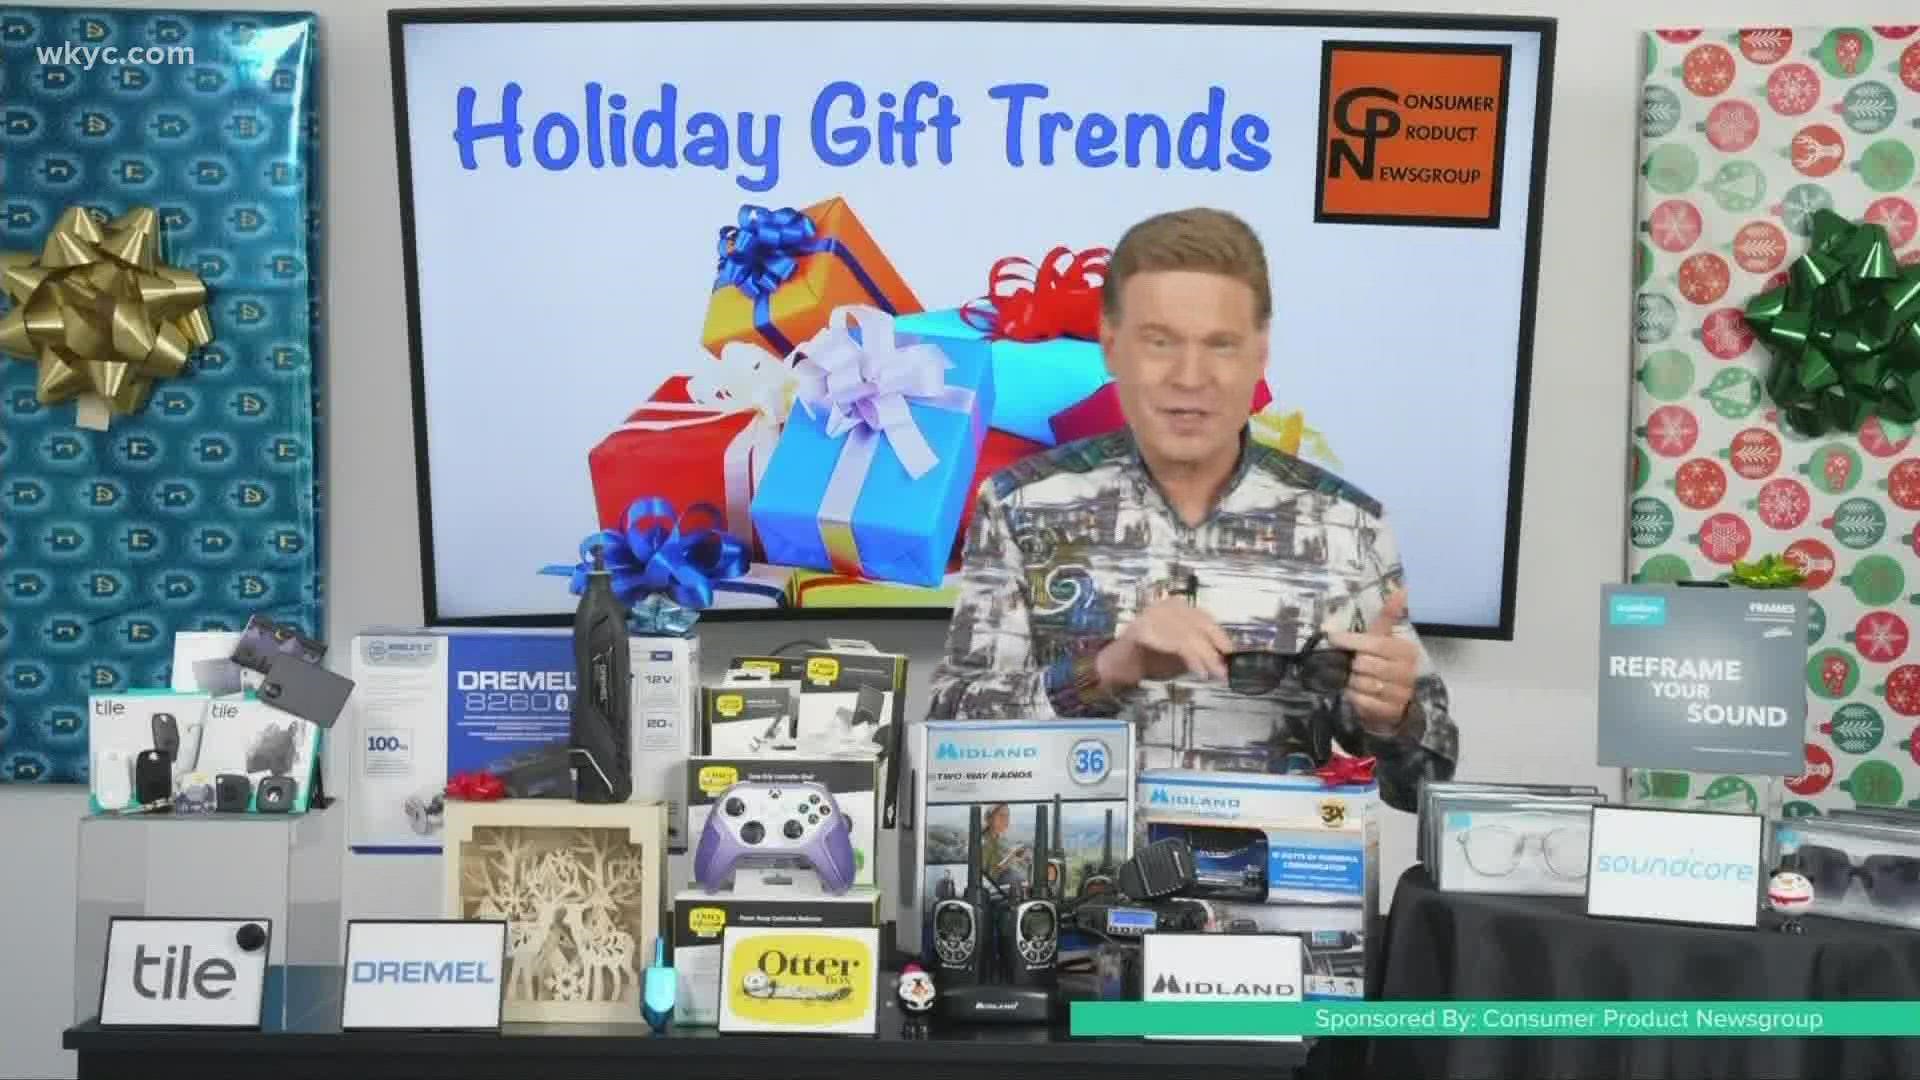 Are you still looking for the perfect gift?! Consumer Product Newsgroup's executive editor David Gregg is here to talk tech trends!